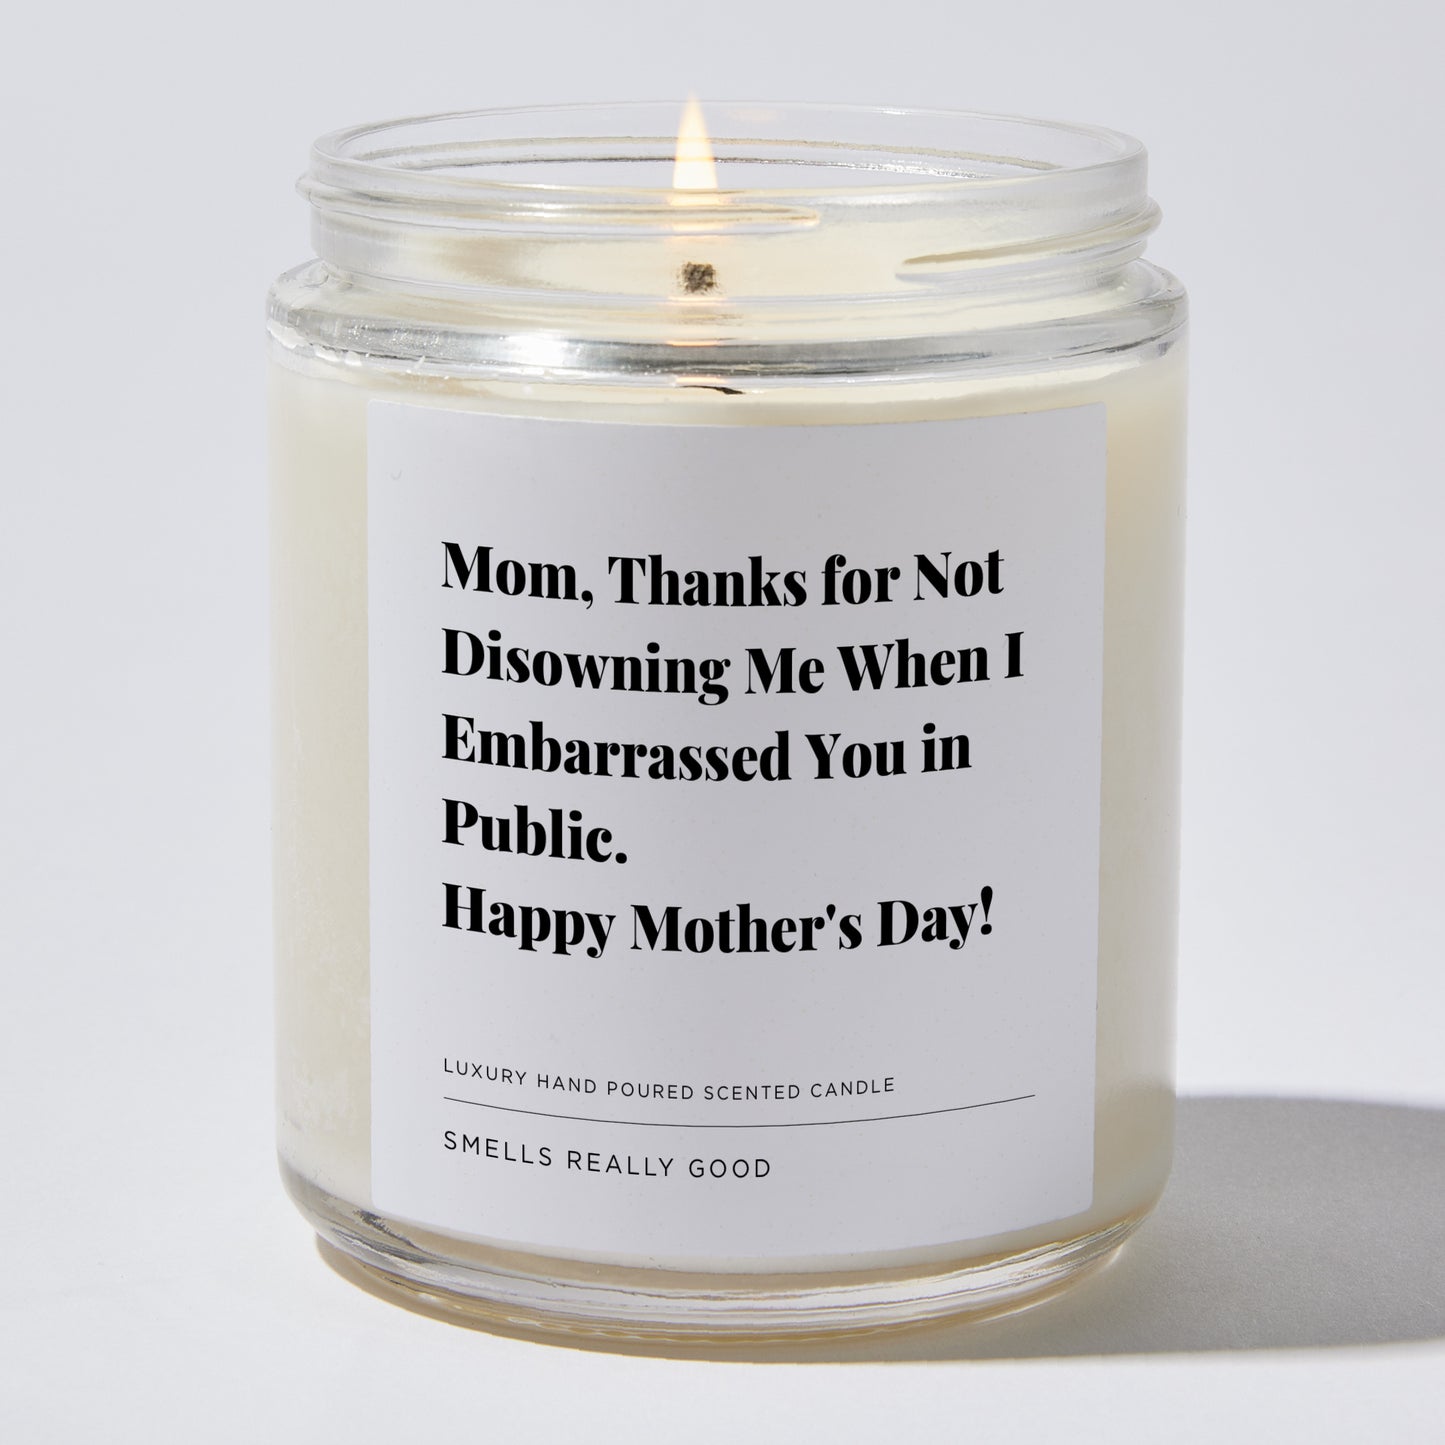 Gift for Mom - Mom, thanks for not disowning me when I embarrassed you in public. Happy Mother's Day! - Candle